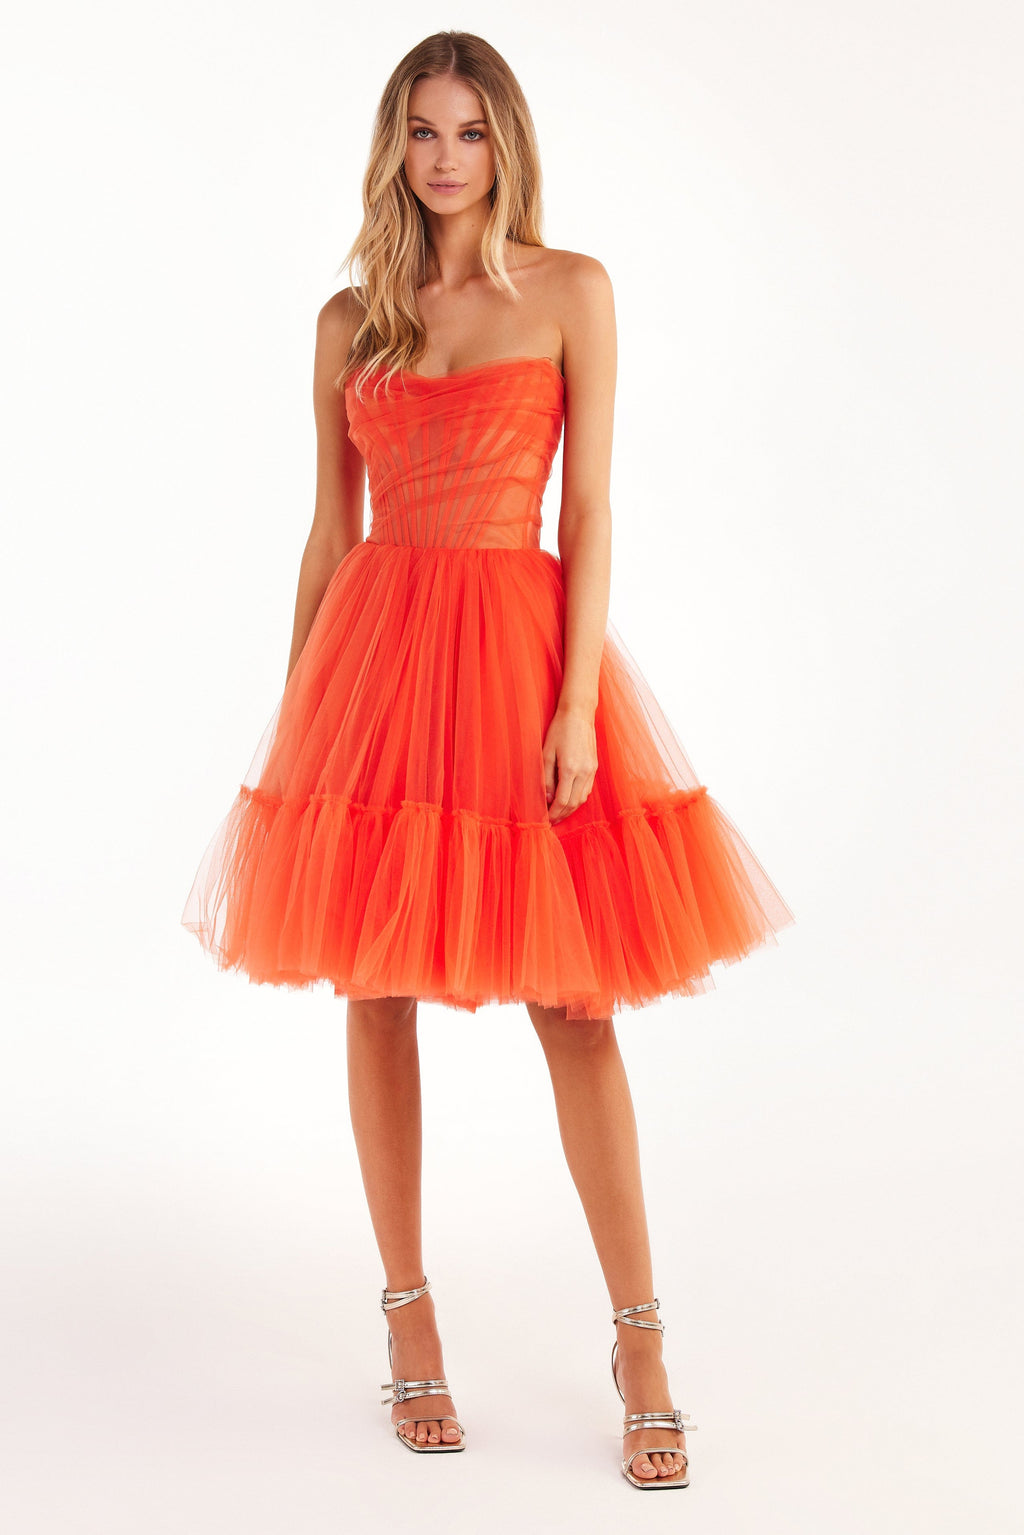 Passion Strapless Tulle mini dress in red coral color